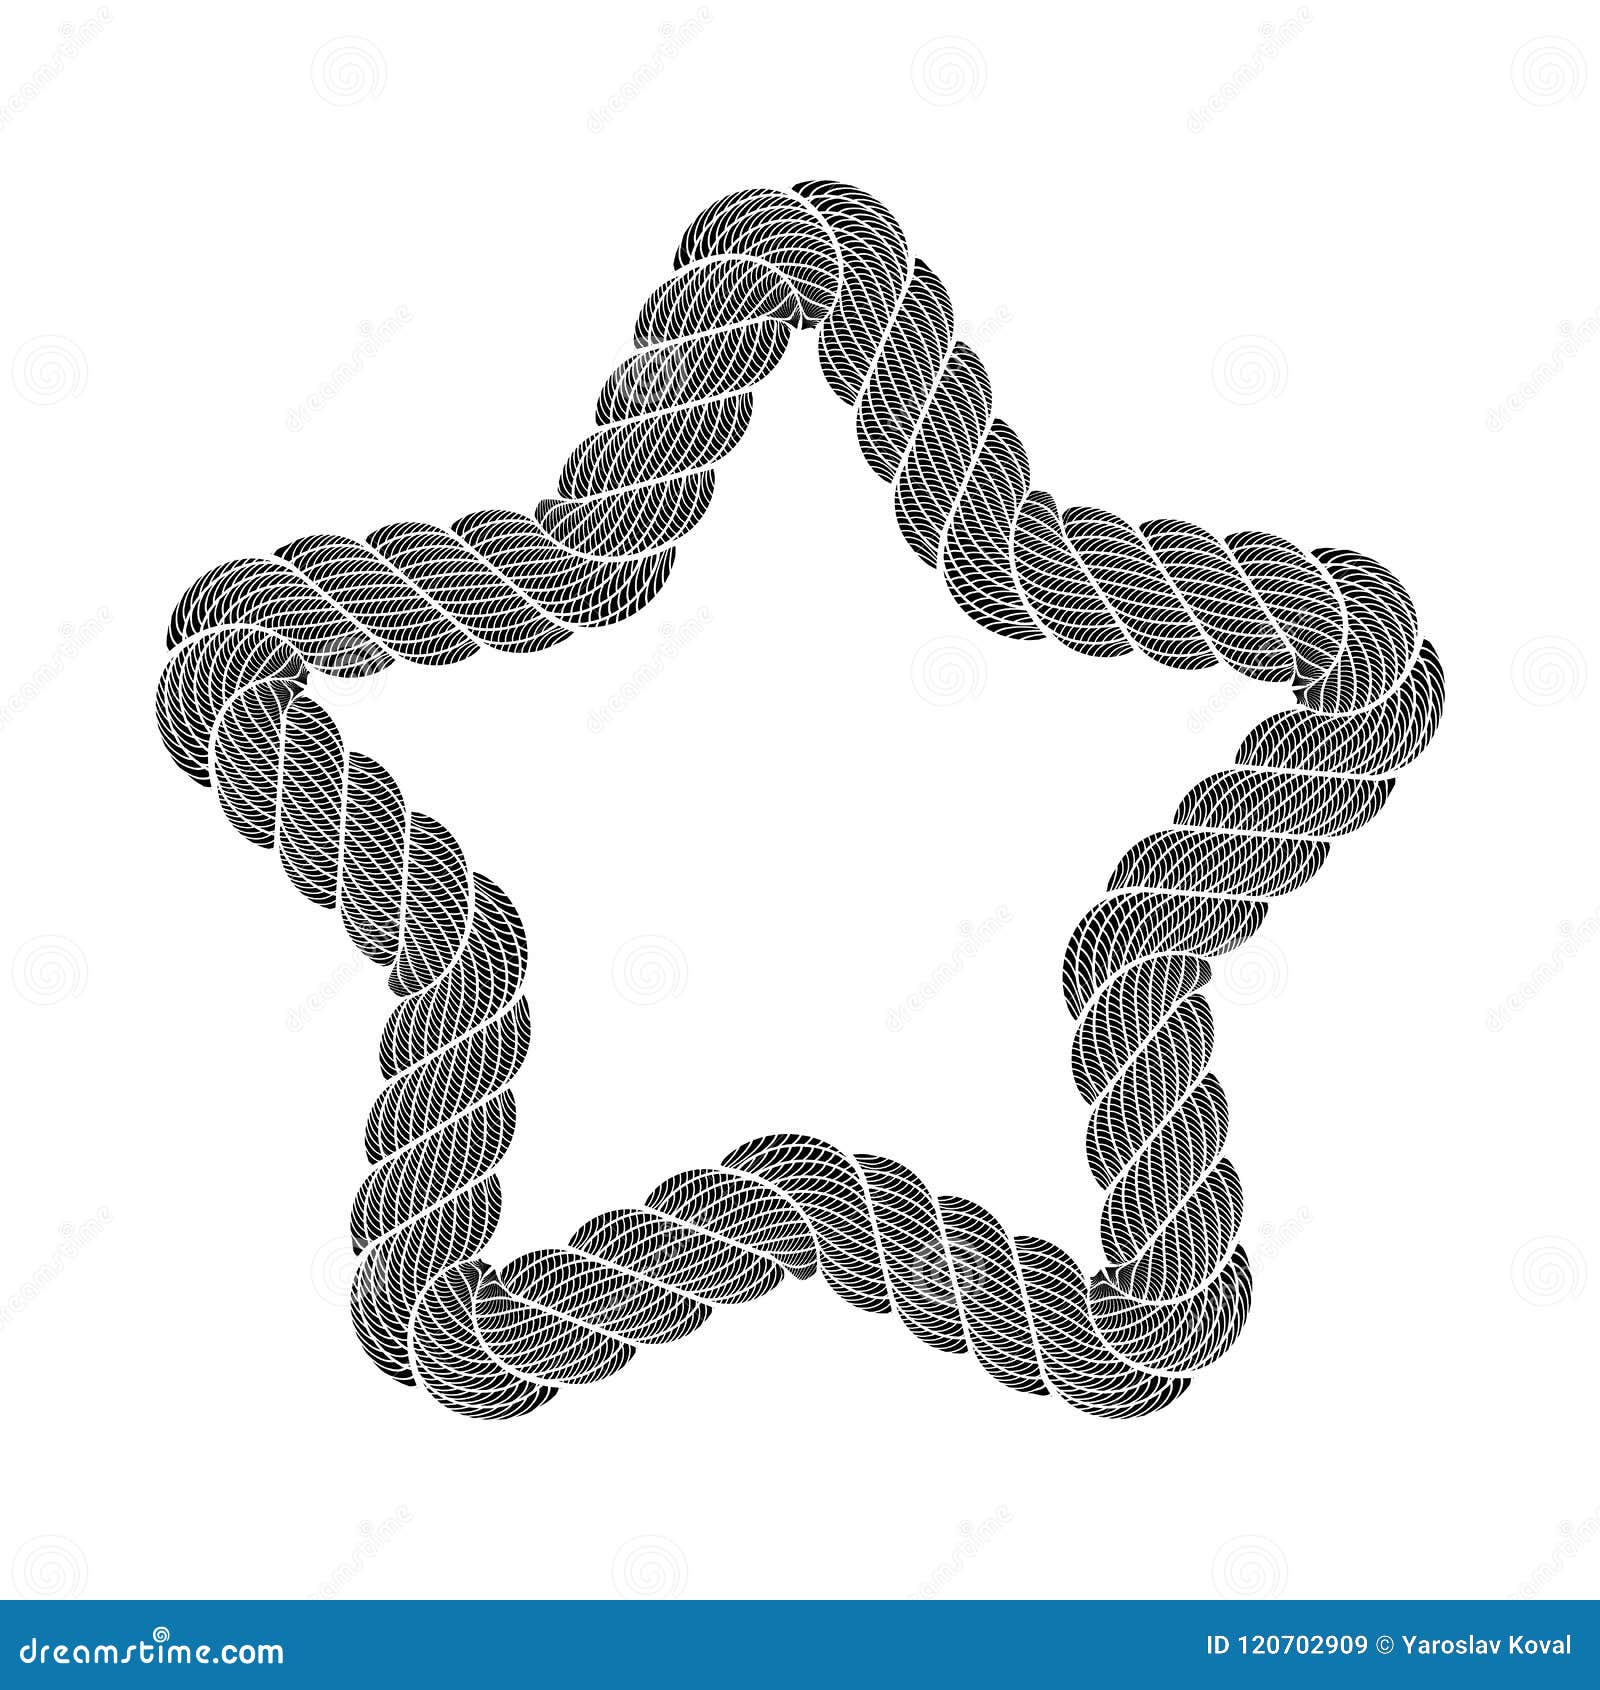 star clasic from rope weaving loop, simple style